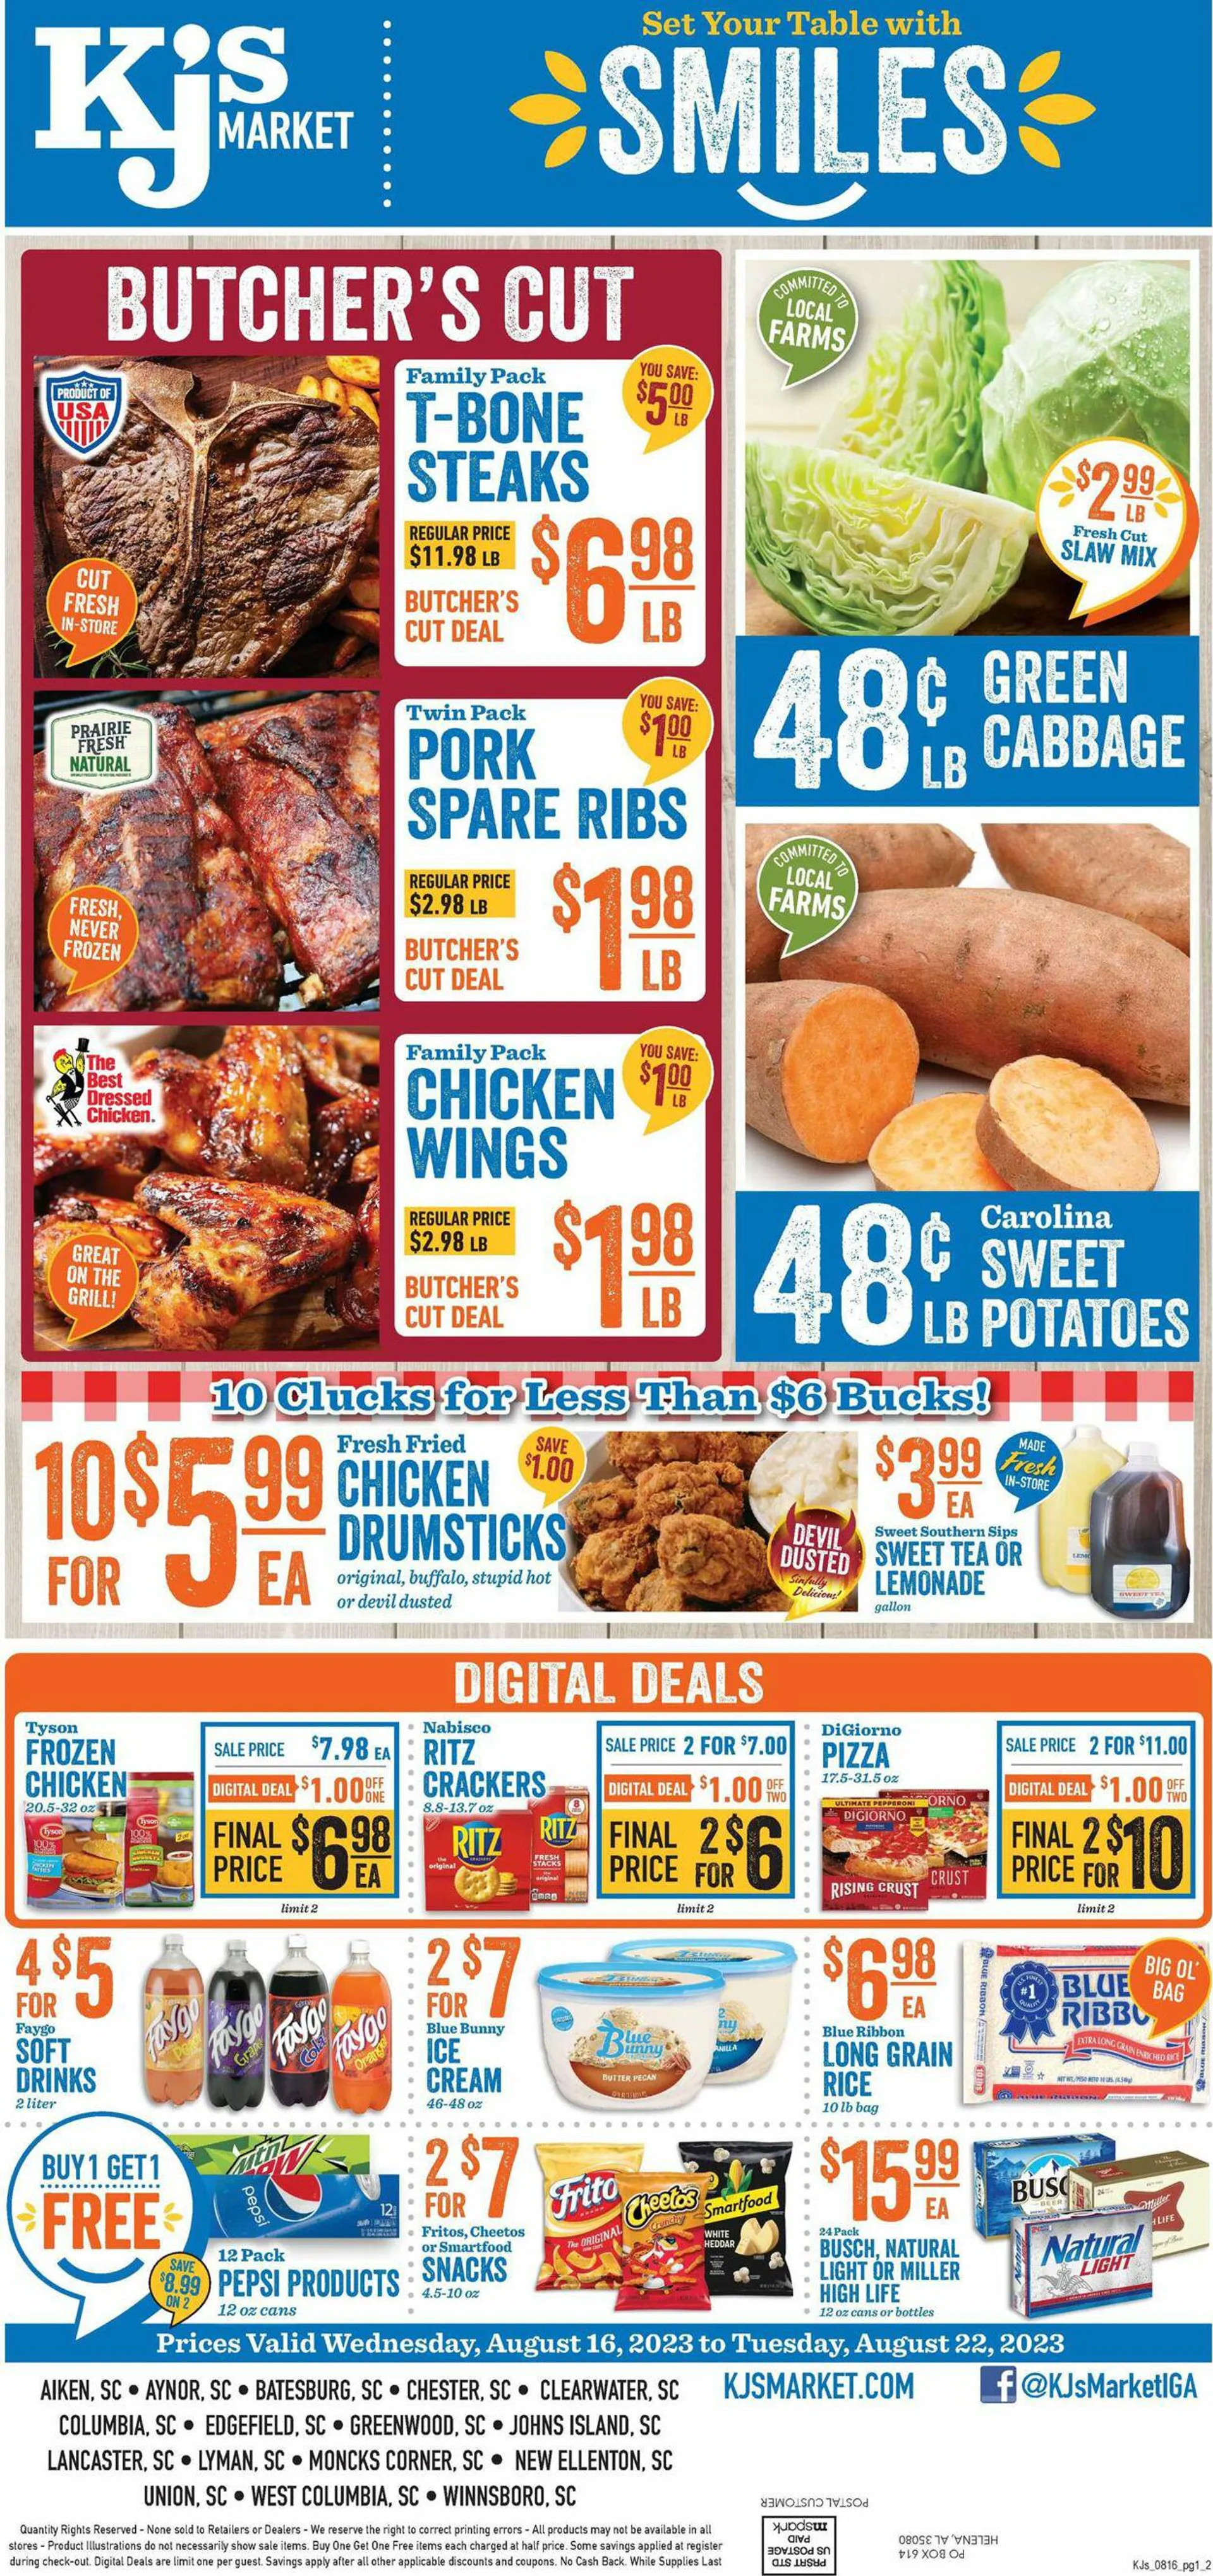 KJ´s Market Current weekly ad - 1